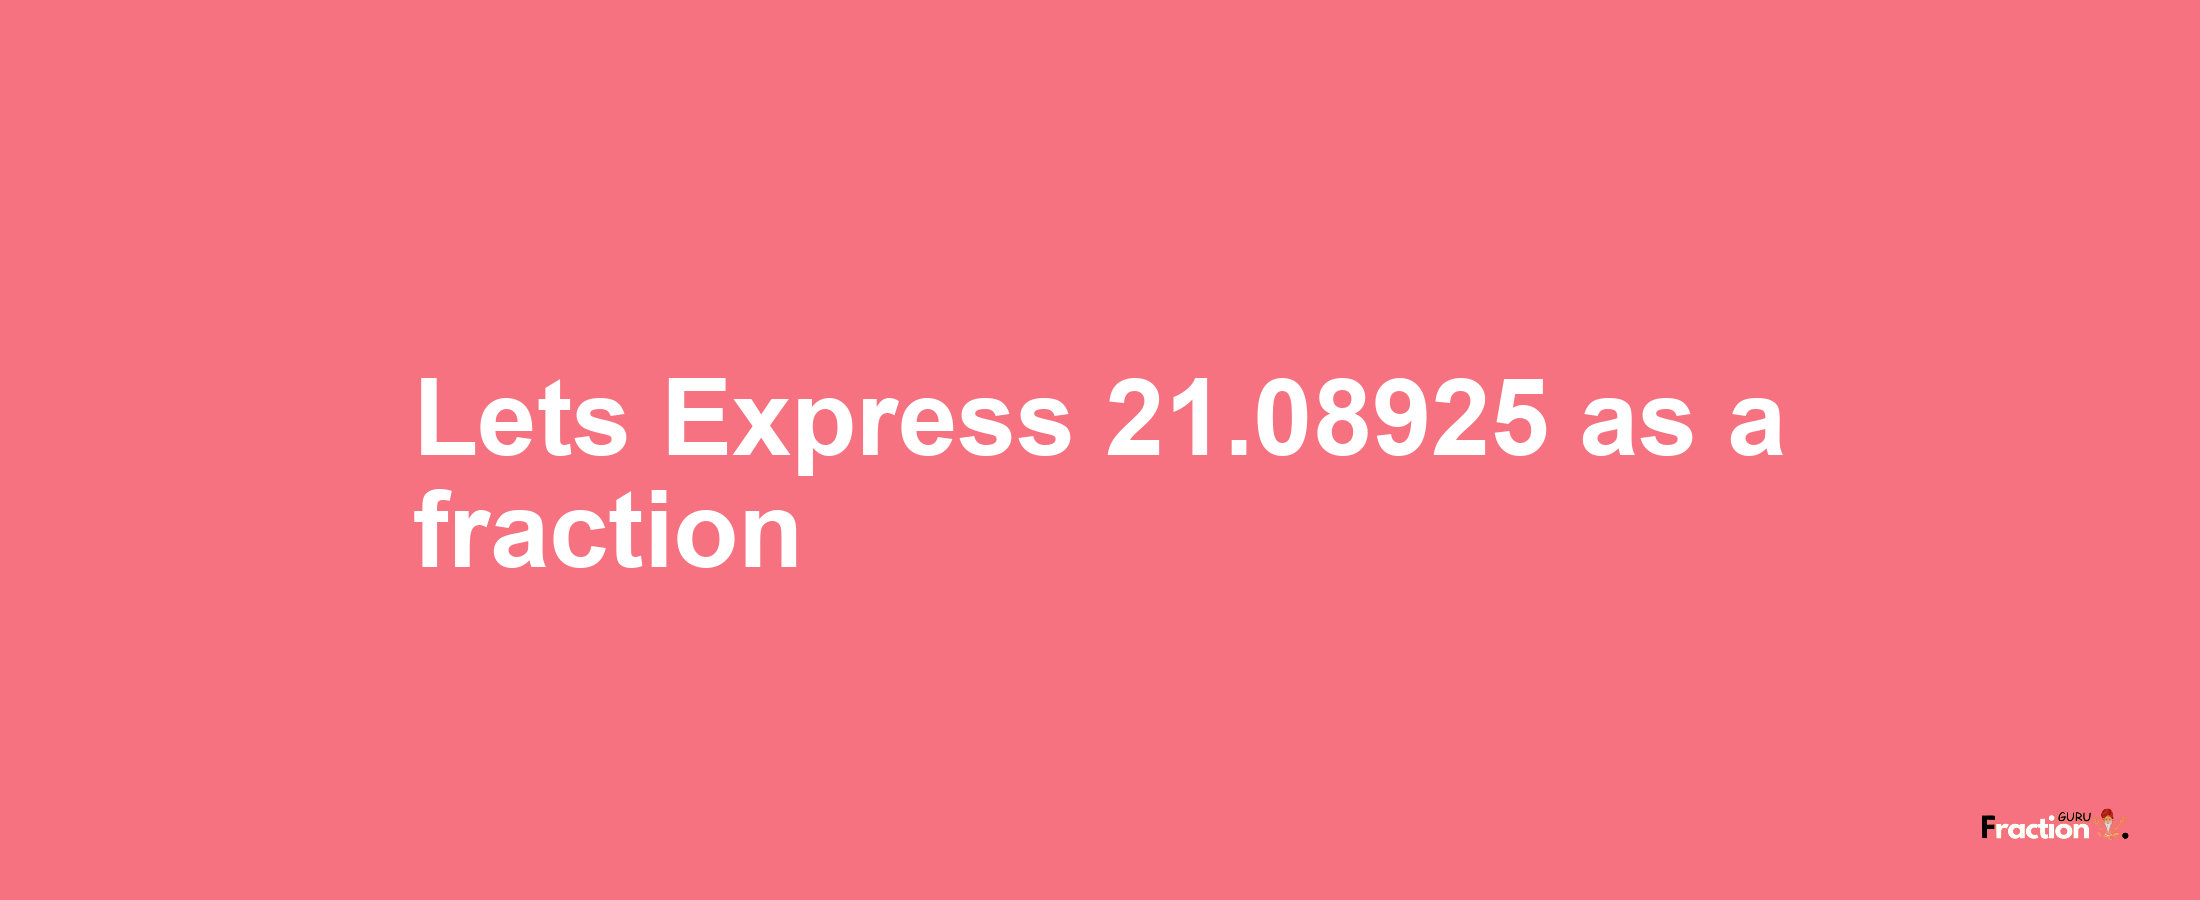 Lets Express 21.08925 as afraction